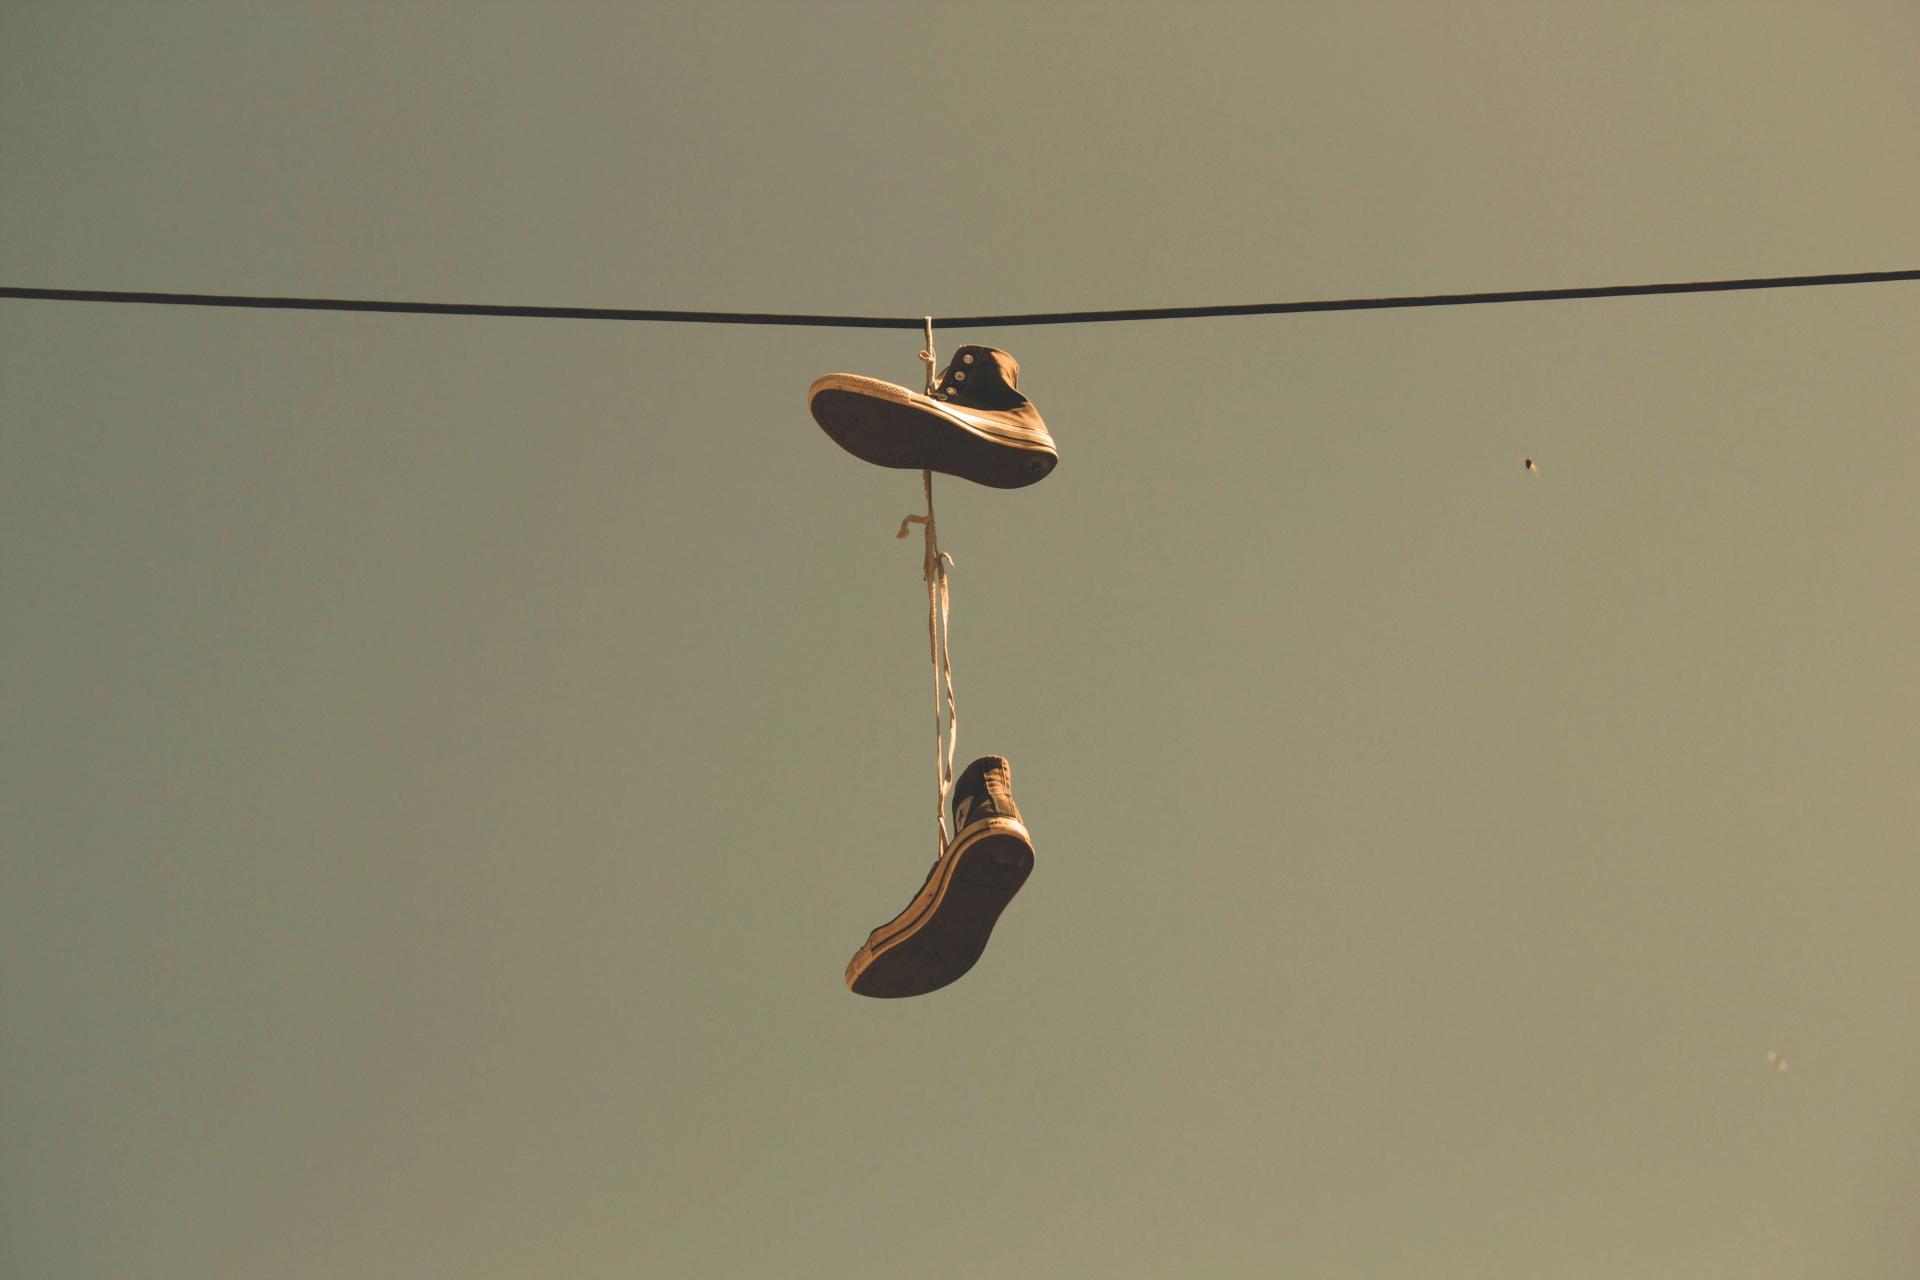 Shoes Hanging on a Thread